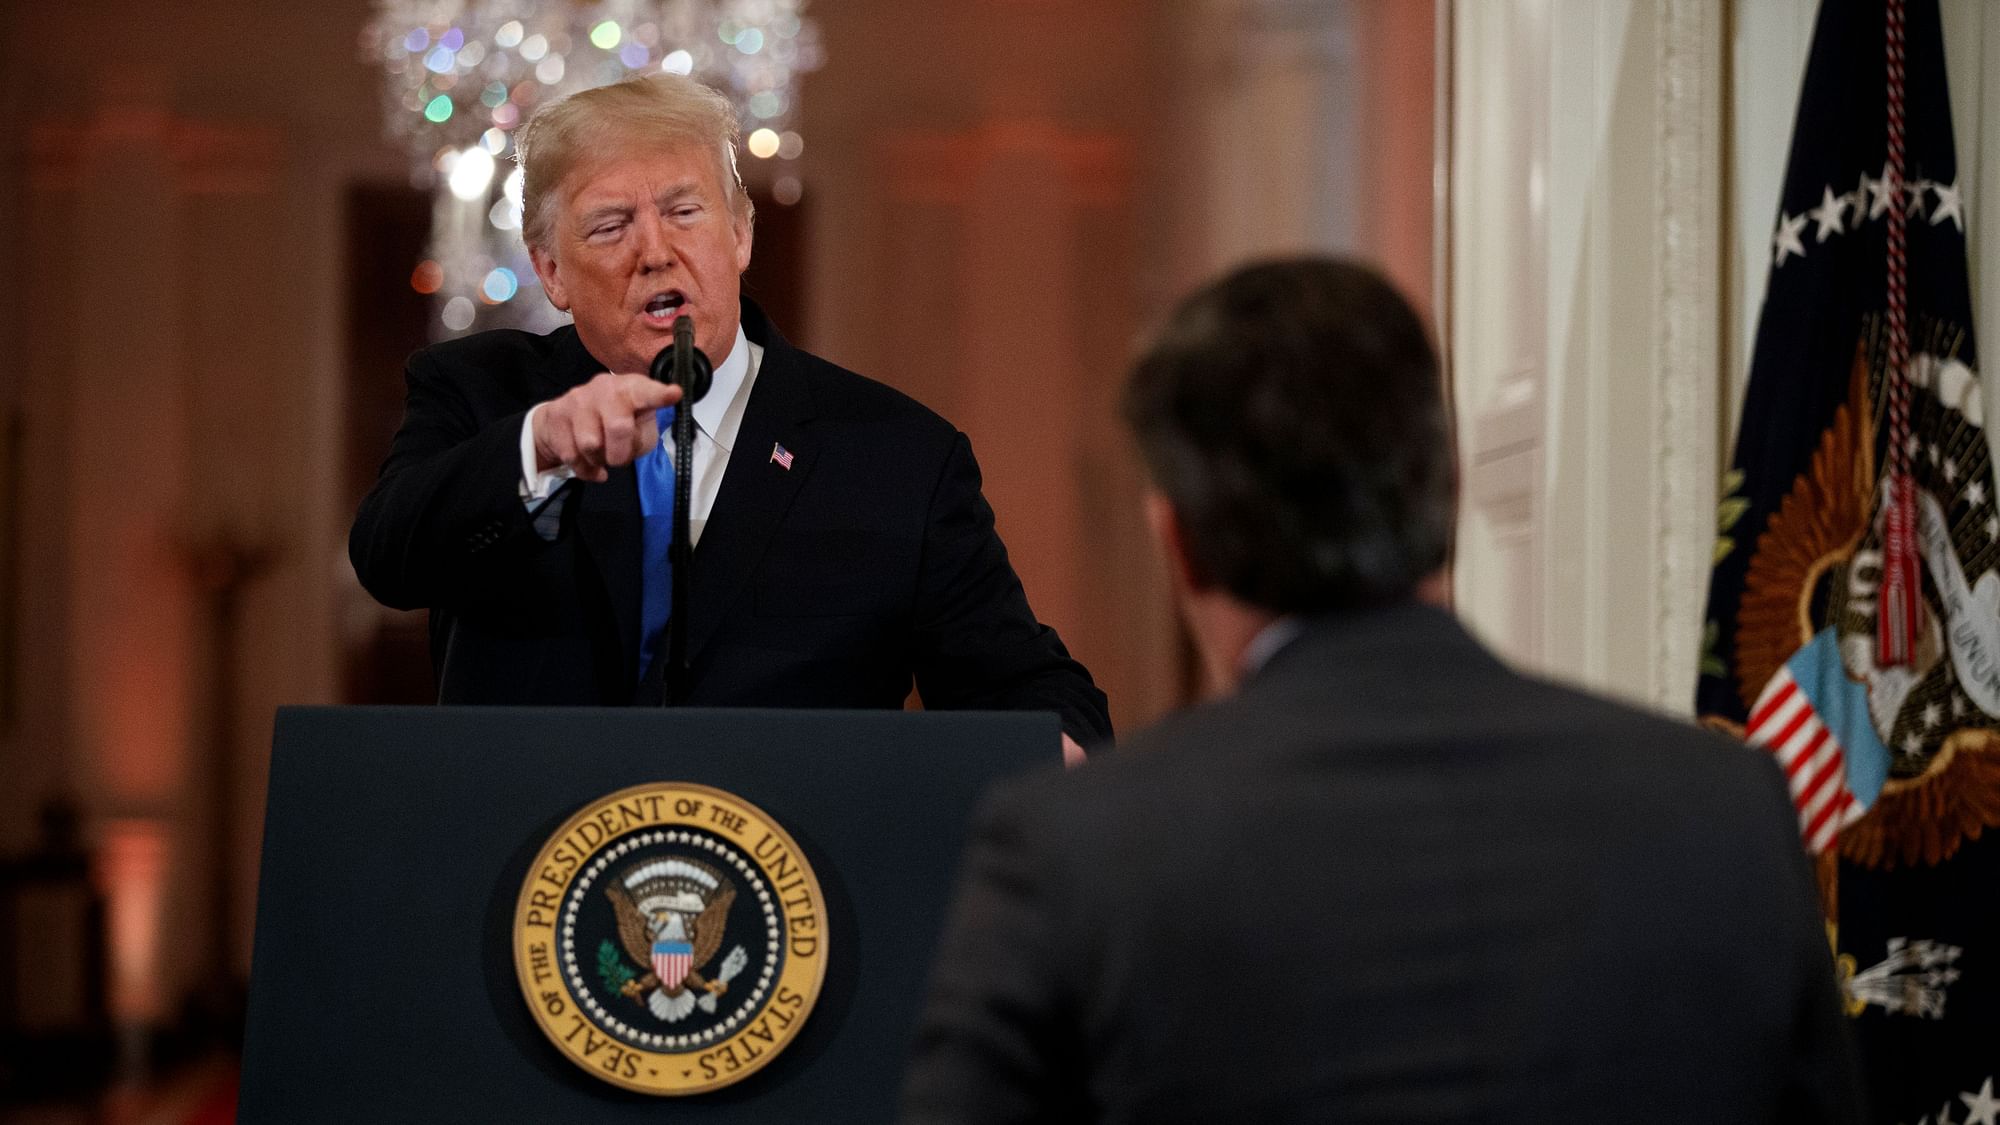 President Donald Trump speaks to CNN journalist Jim Acosta during a news conference.